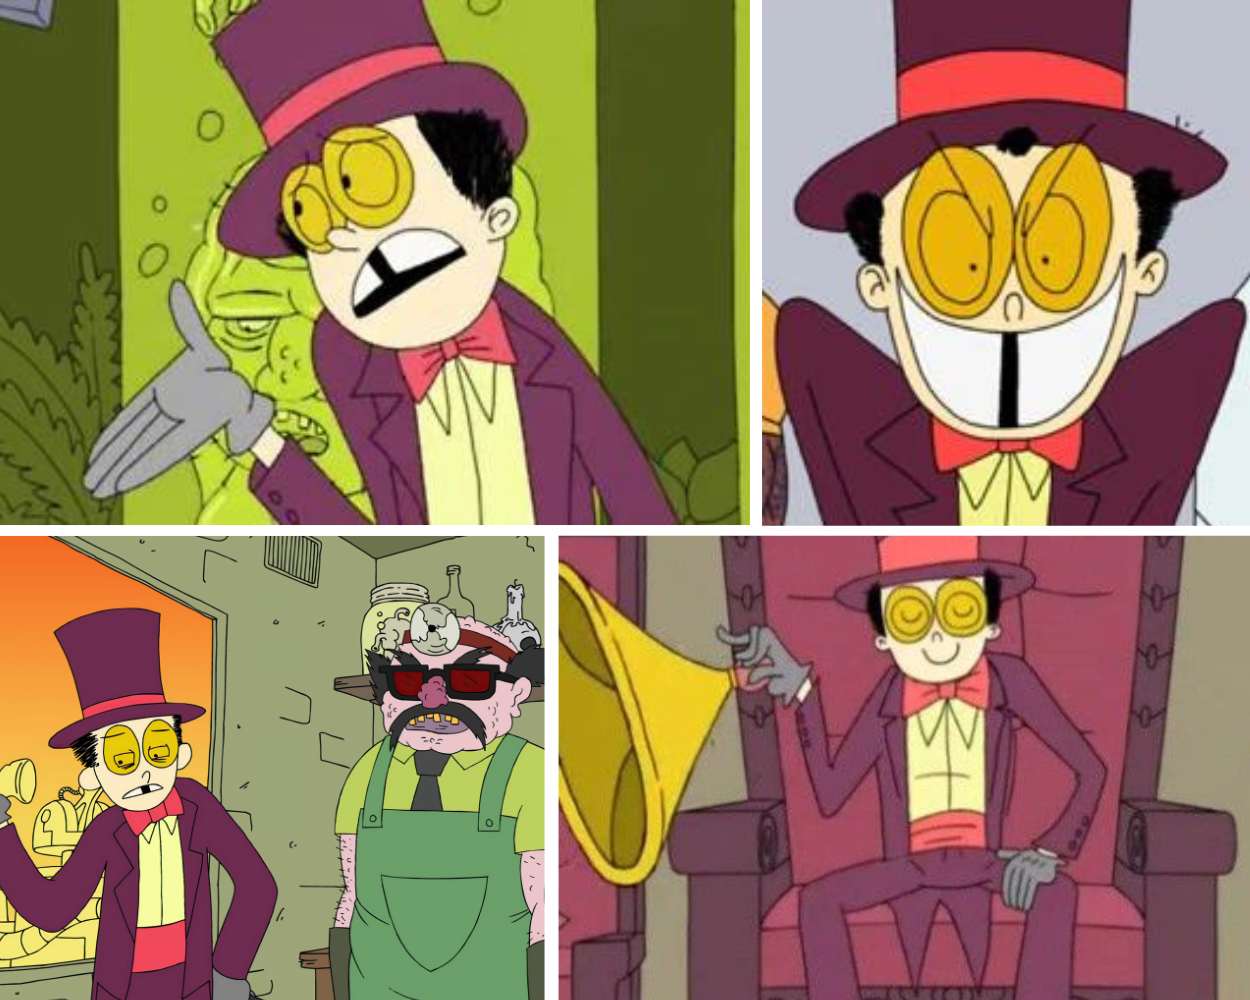 The Warden from Superjail